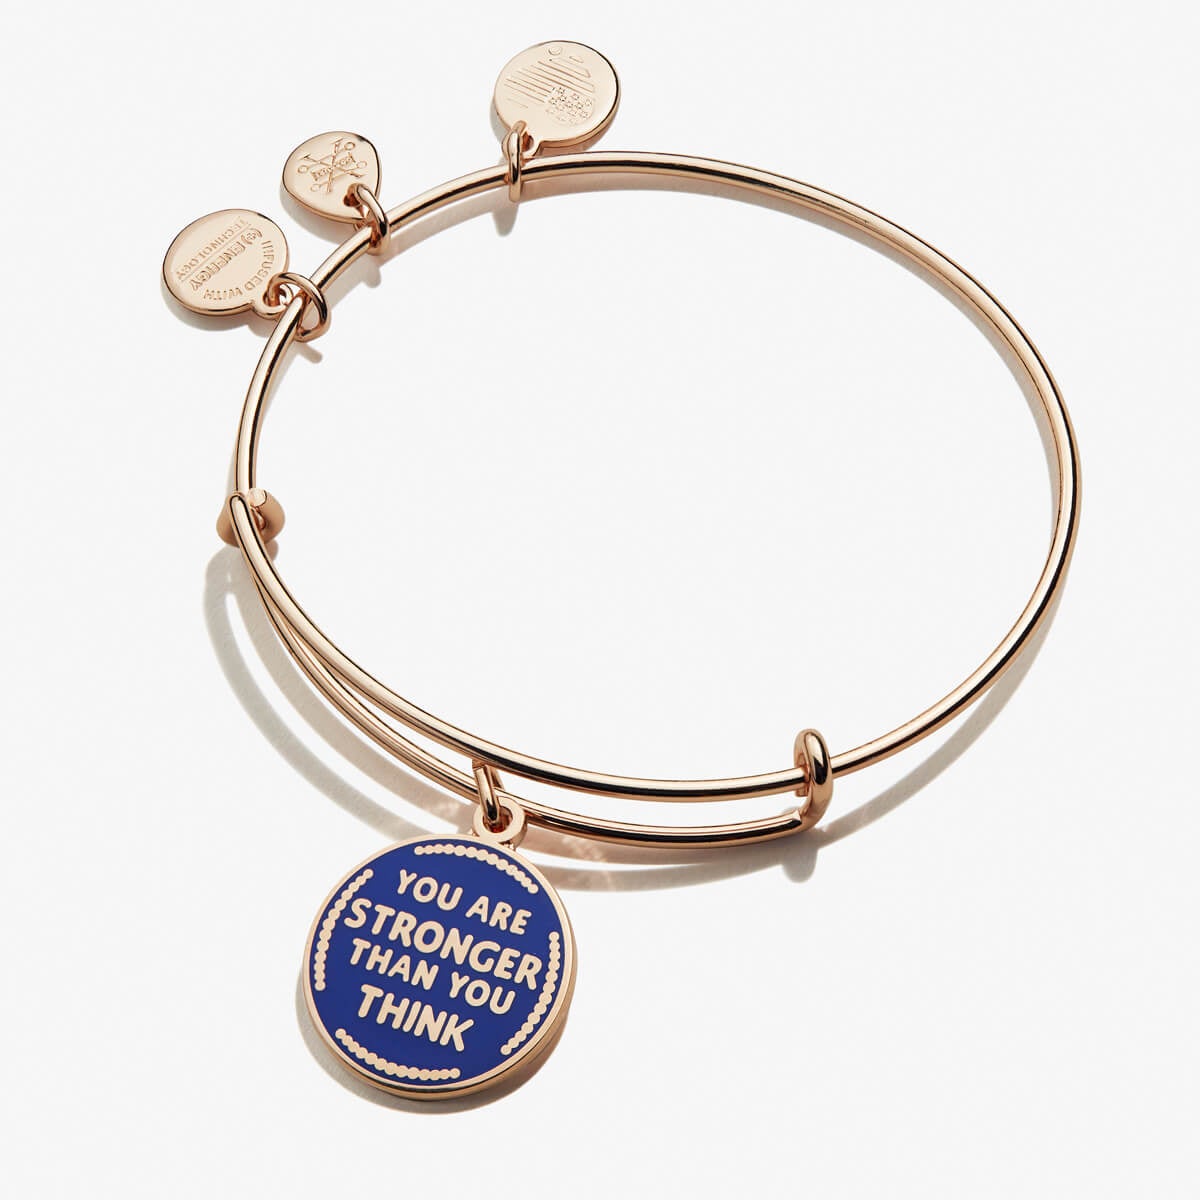 'You Are Stronger Than You Think' Charm Bangle